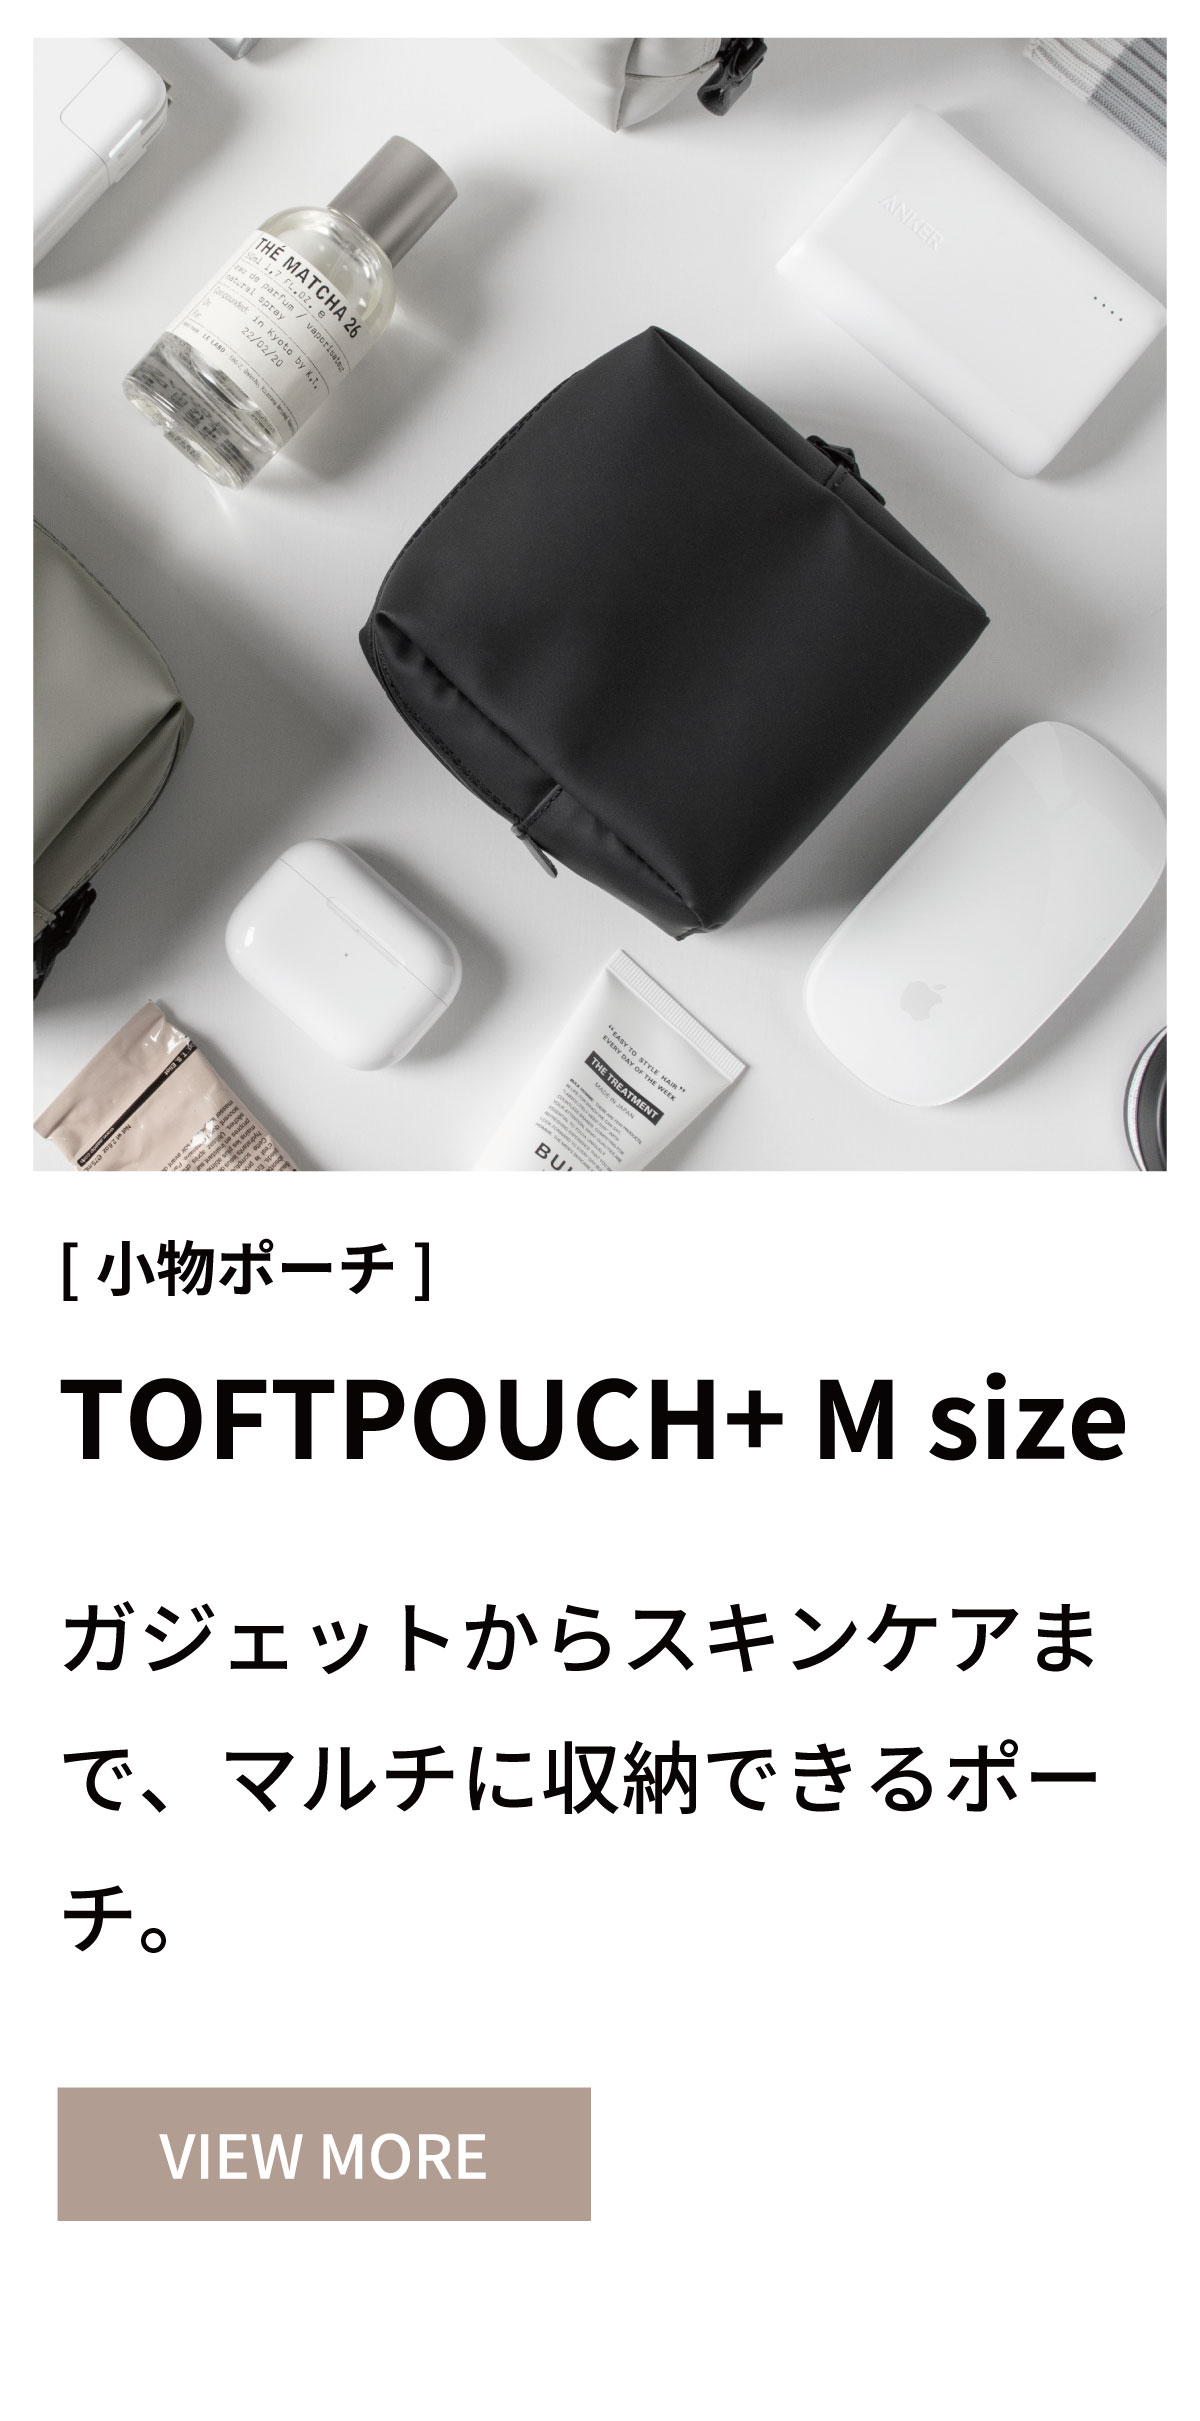 TOFTPOUCH + M size